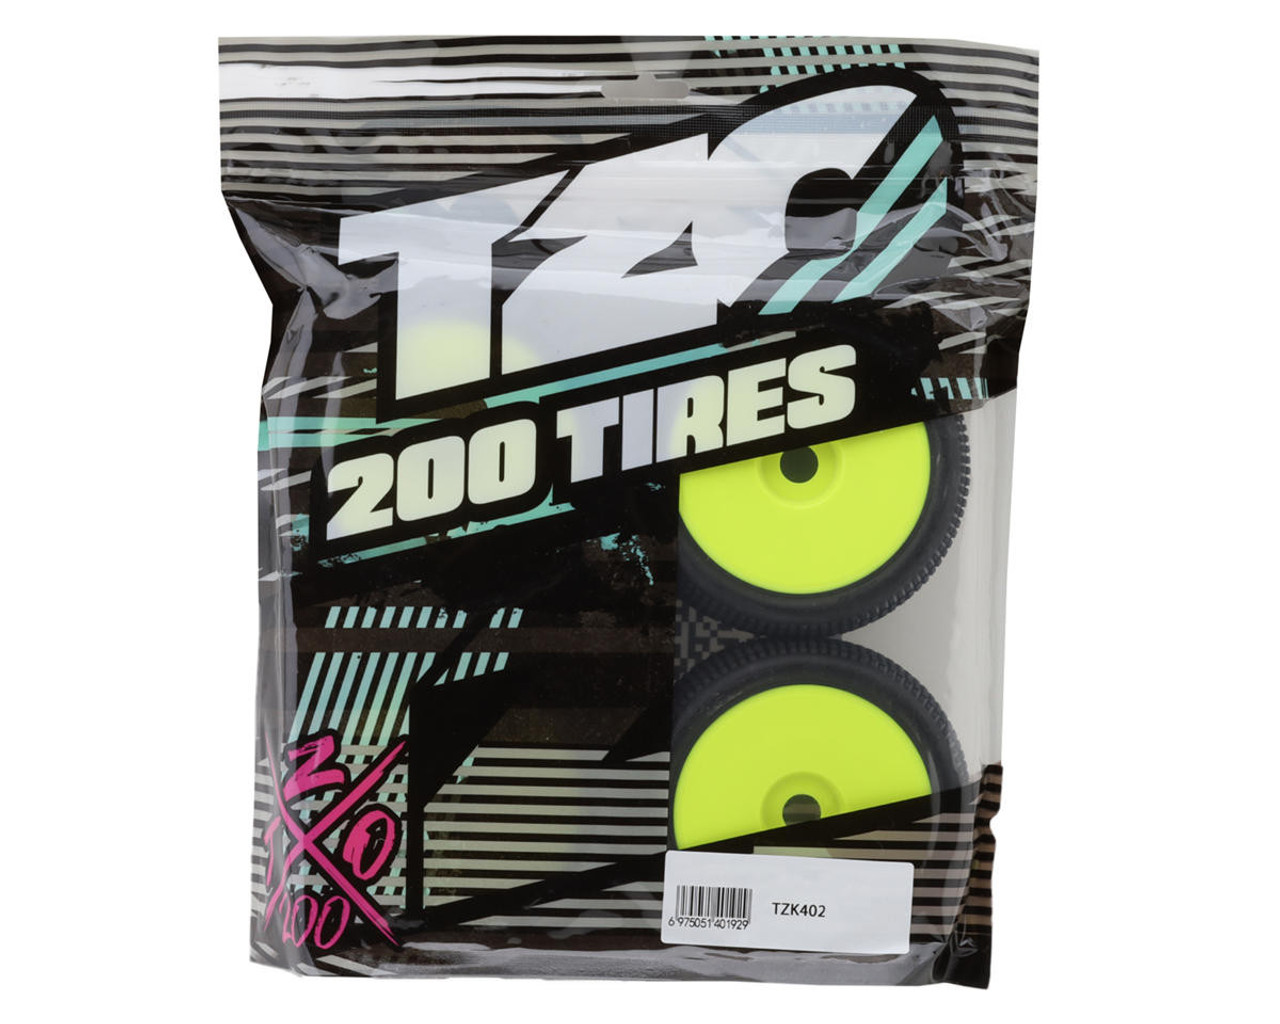 TZO Tires 402 1/8 Buggy Pre-Glued Tire Set (Yellow) (4) (Super Soft)